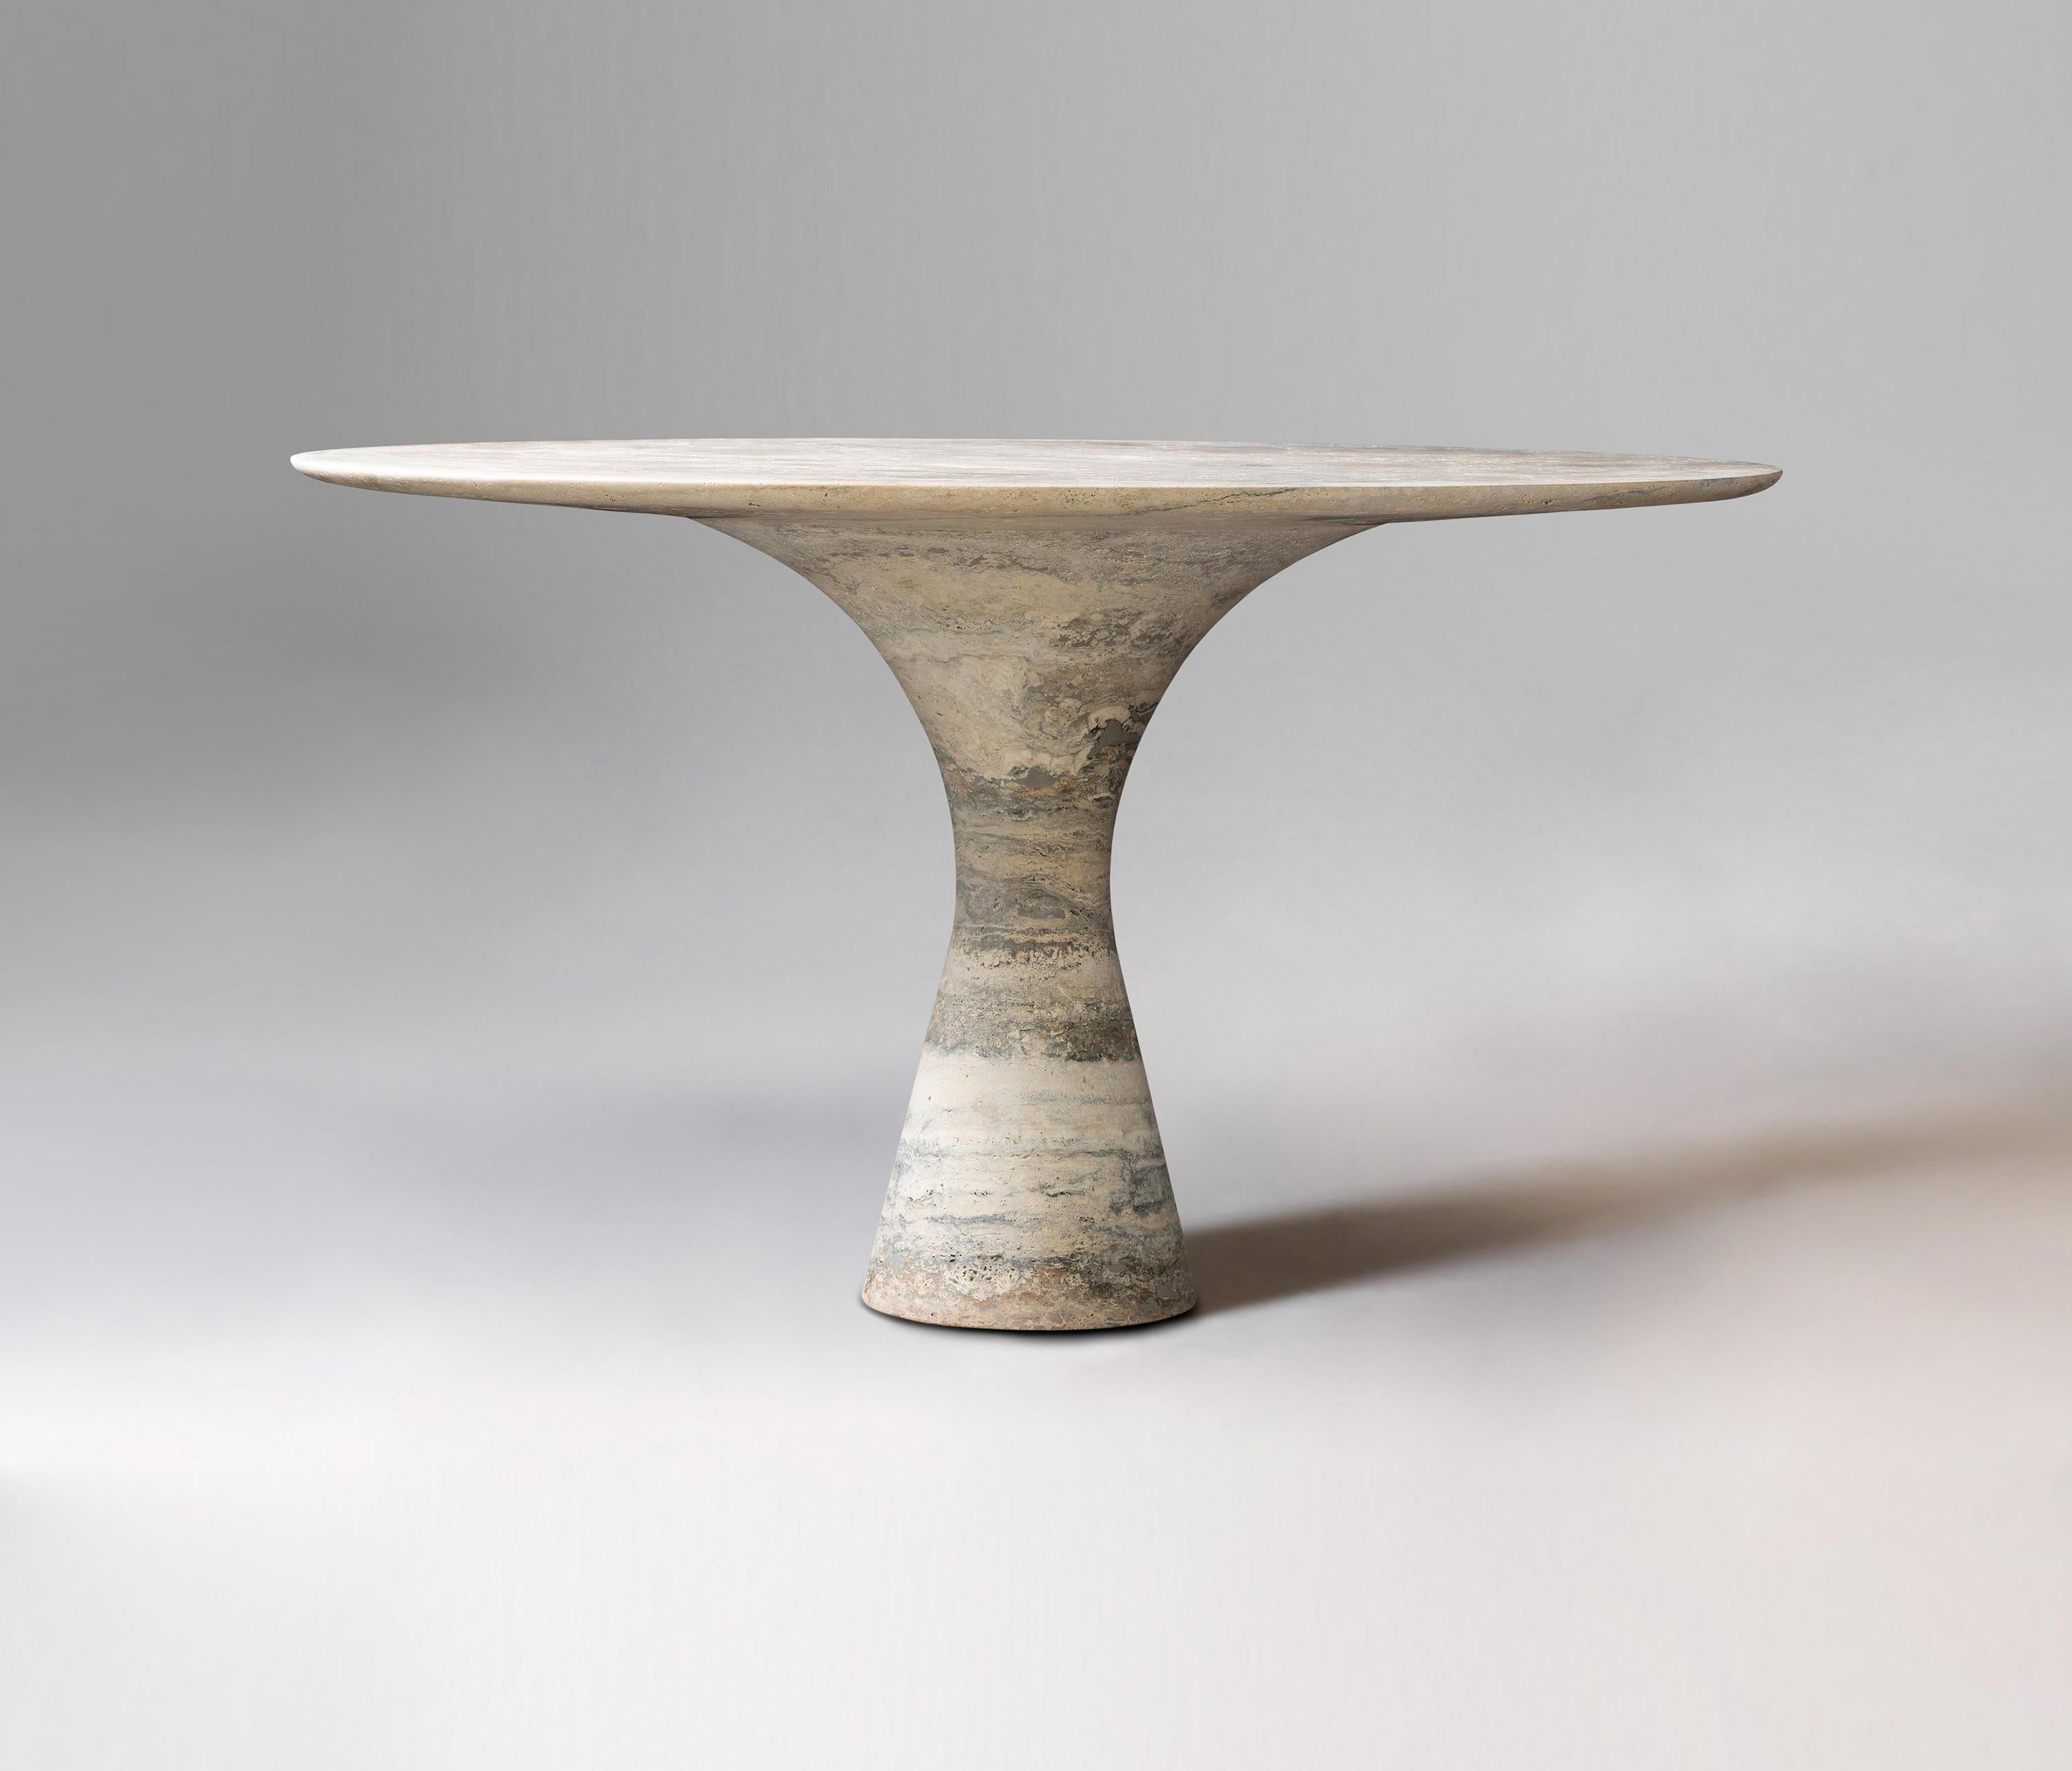 Travertino Silver Refined Contemporary Marble Dining Table 130/75
Dimensions: 130 x 75 cm
Materials: Travertino Silver 

Angelo is the essence of a round table in natural stone, a sculptural shape in robust material with elegant lines and refined